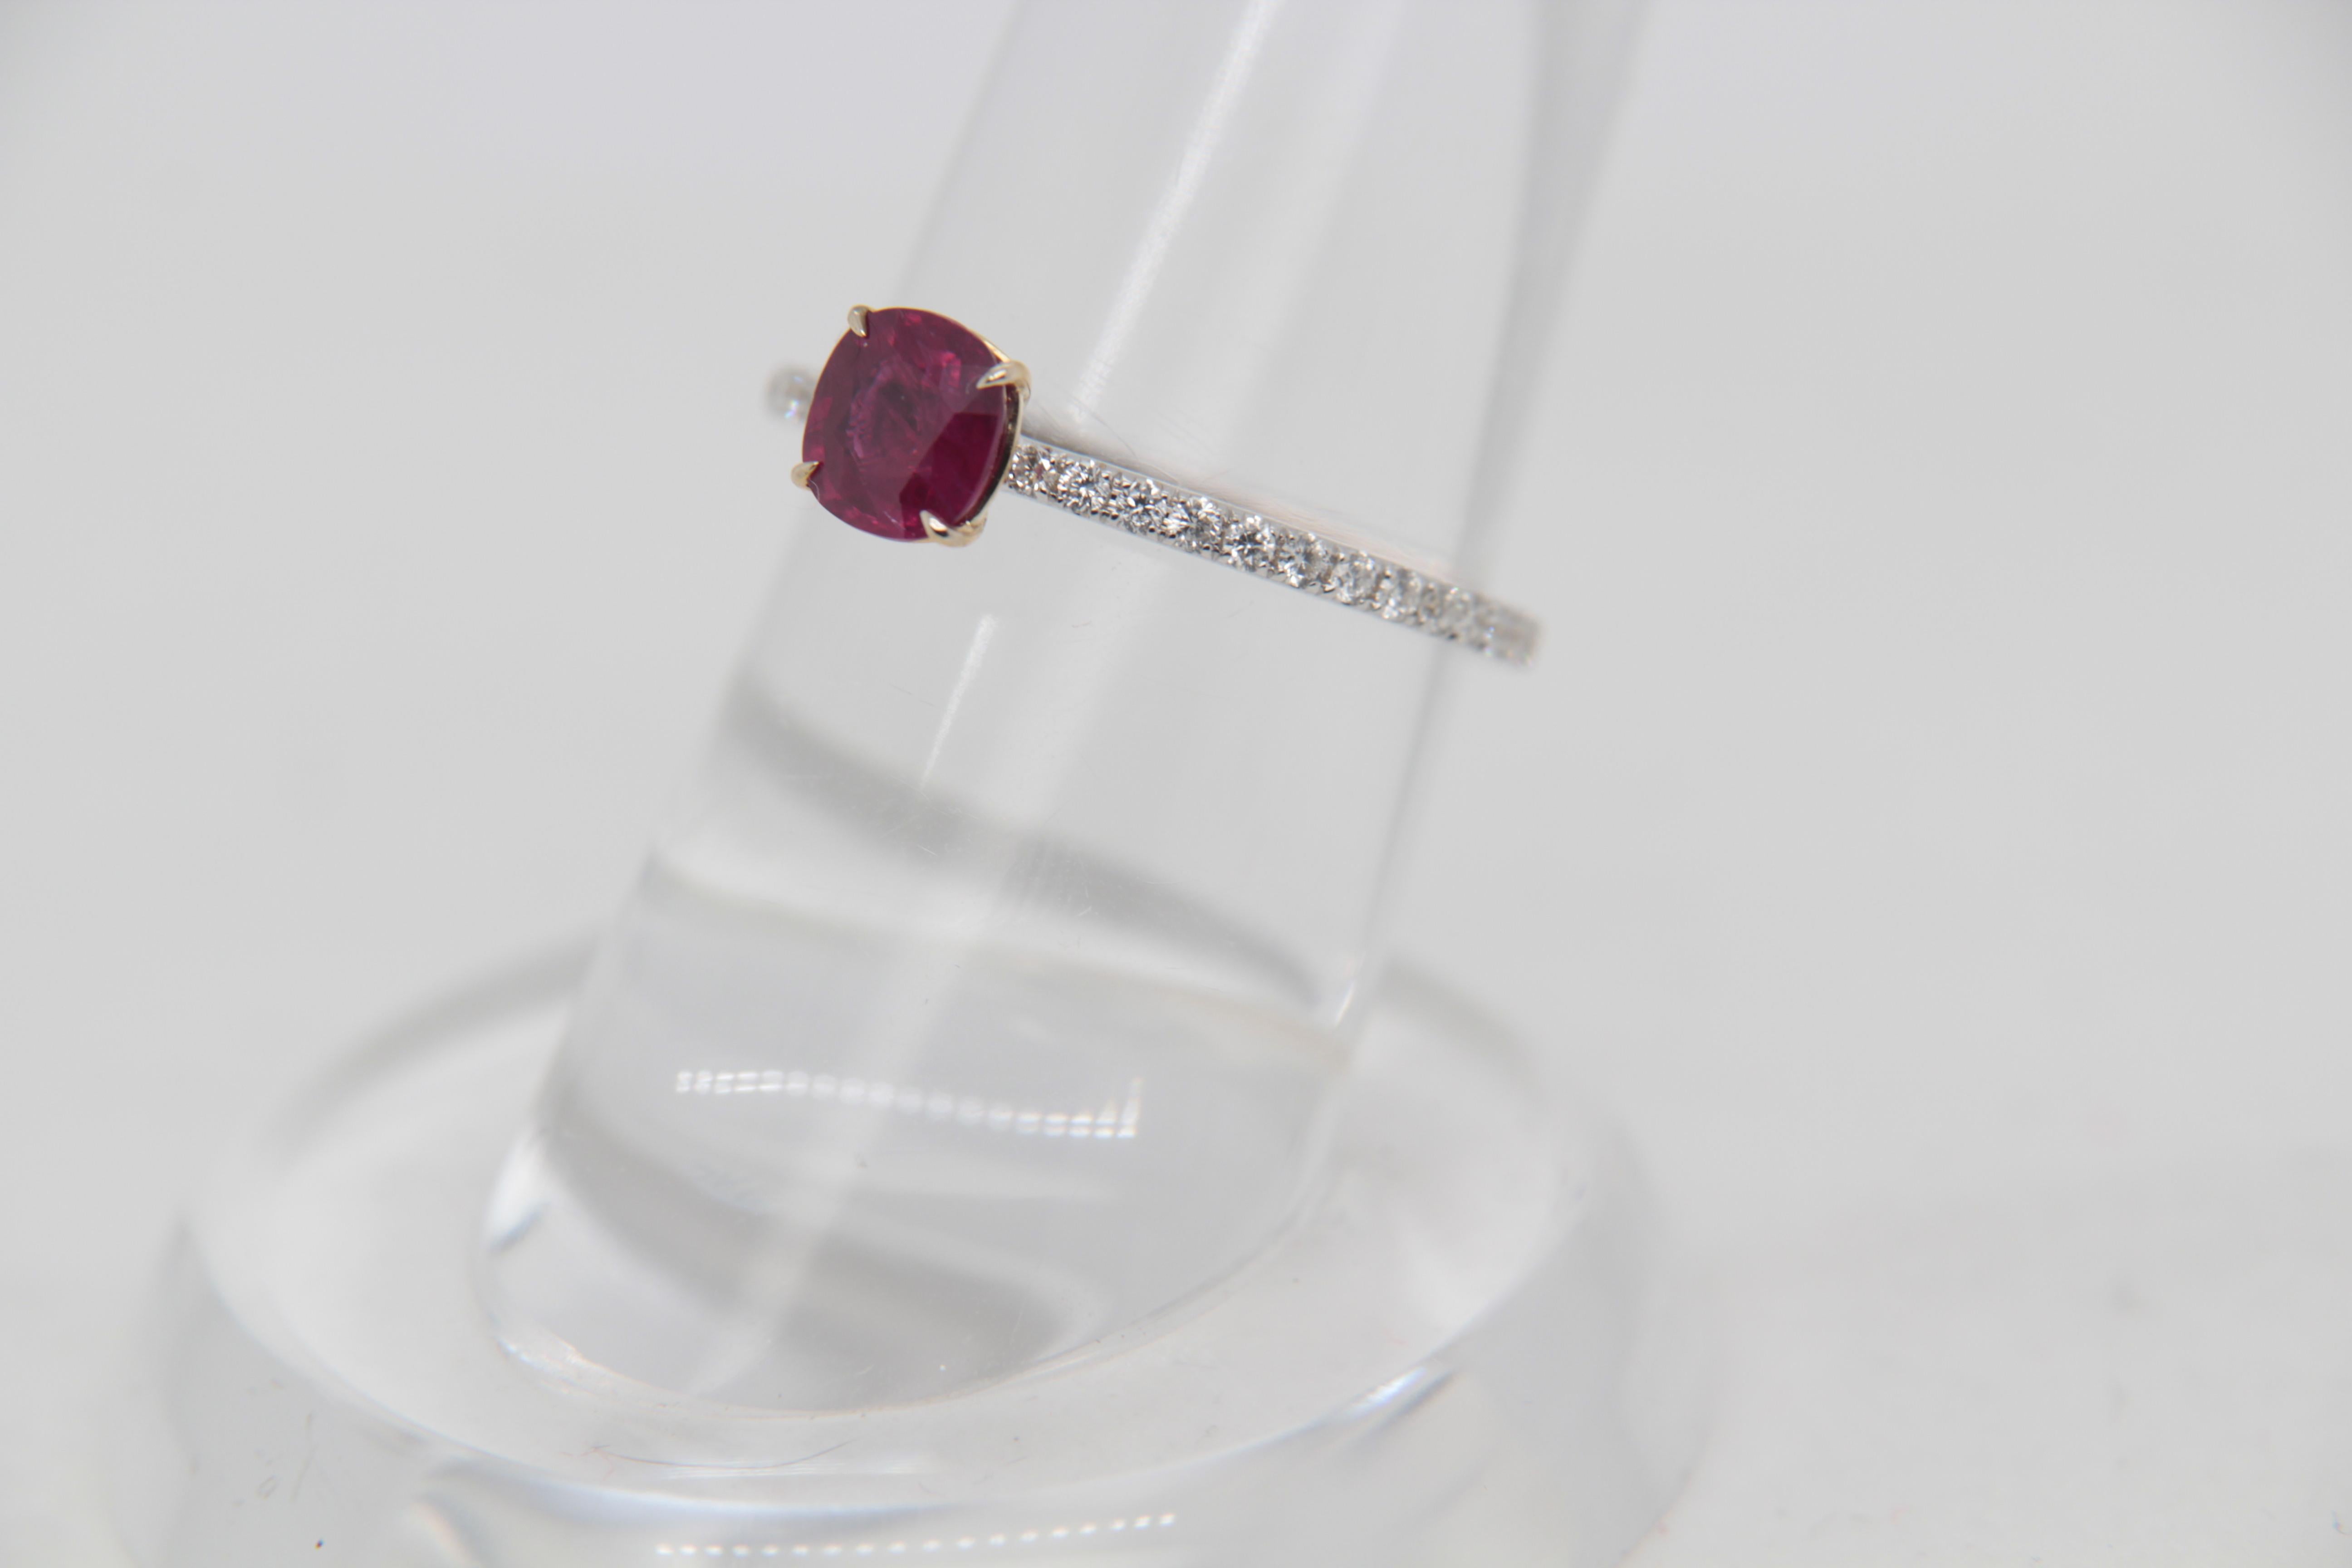 A brand new 0.86 carat Burmese ruby ring mounted with diamonds in 18 Karat gold. The ruby weighs 0.86 carat and is certified by Gem Research Swisslab (GRS) as natural, no heat, and 'Vivid Red Pigeon's Blood'. The total diamond weight is 0.29 carat